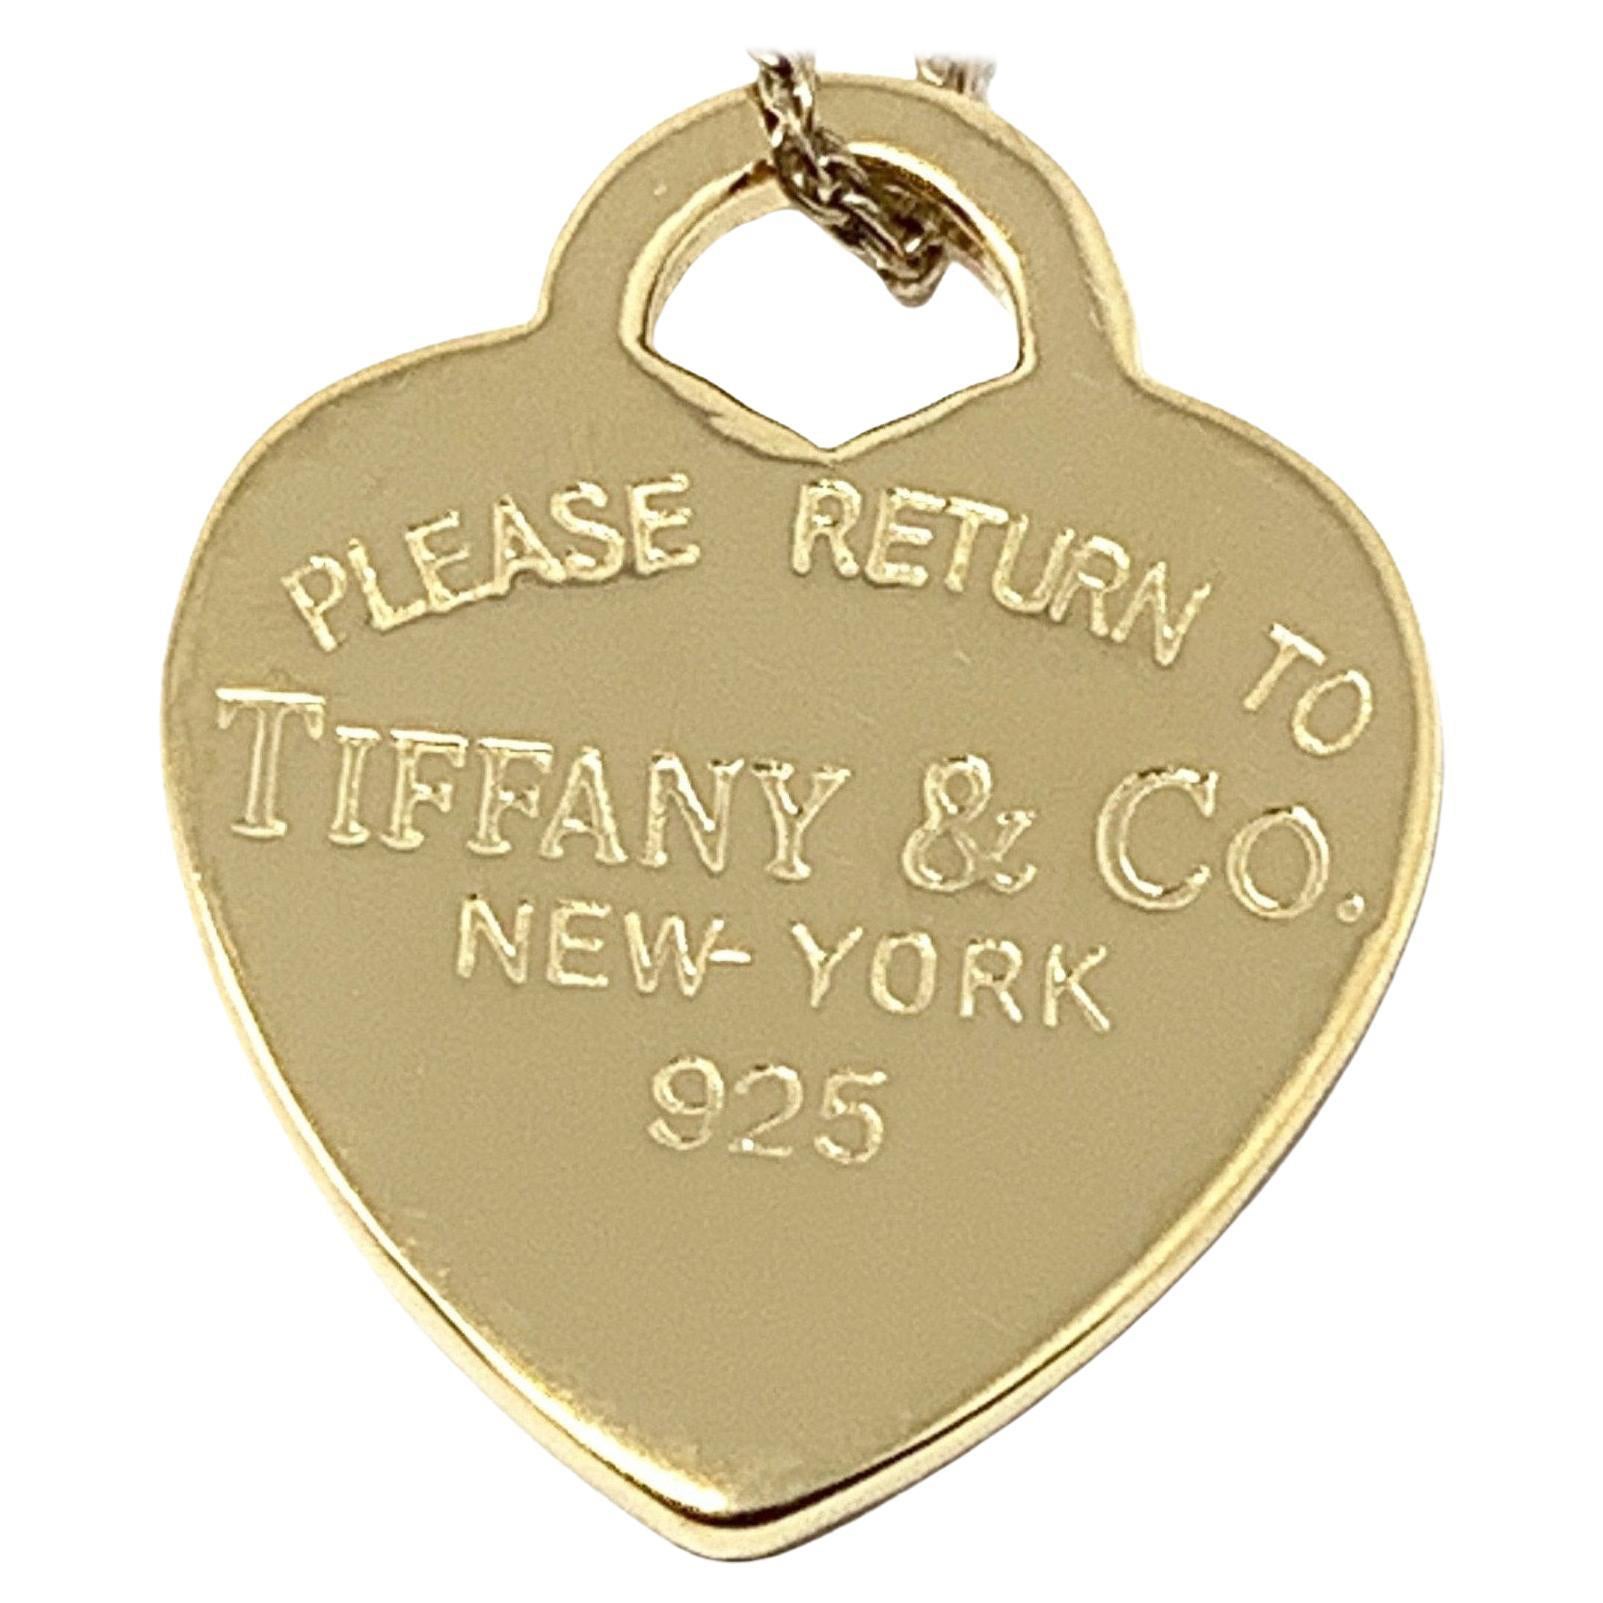 (Item Description) 
Brand - Tiffany&Co.
Gender - Unisex
Condition - Pre-Owned 
Style - Heart Pendant 
Metals - 925 Silver 
Coating - 24k Yellow Gold
Weight - 4.0 Grams
Hall marks - Please Return to /Tiffany&co NY
length -1 Inch Aprox
Tiffany Jewelry